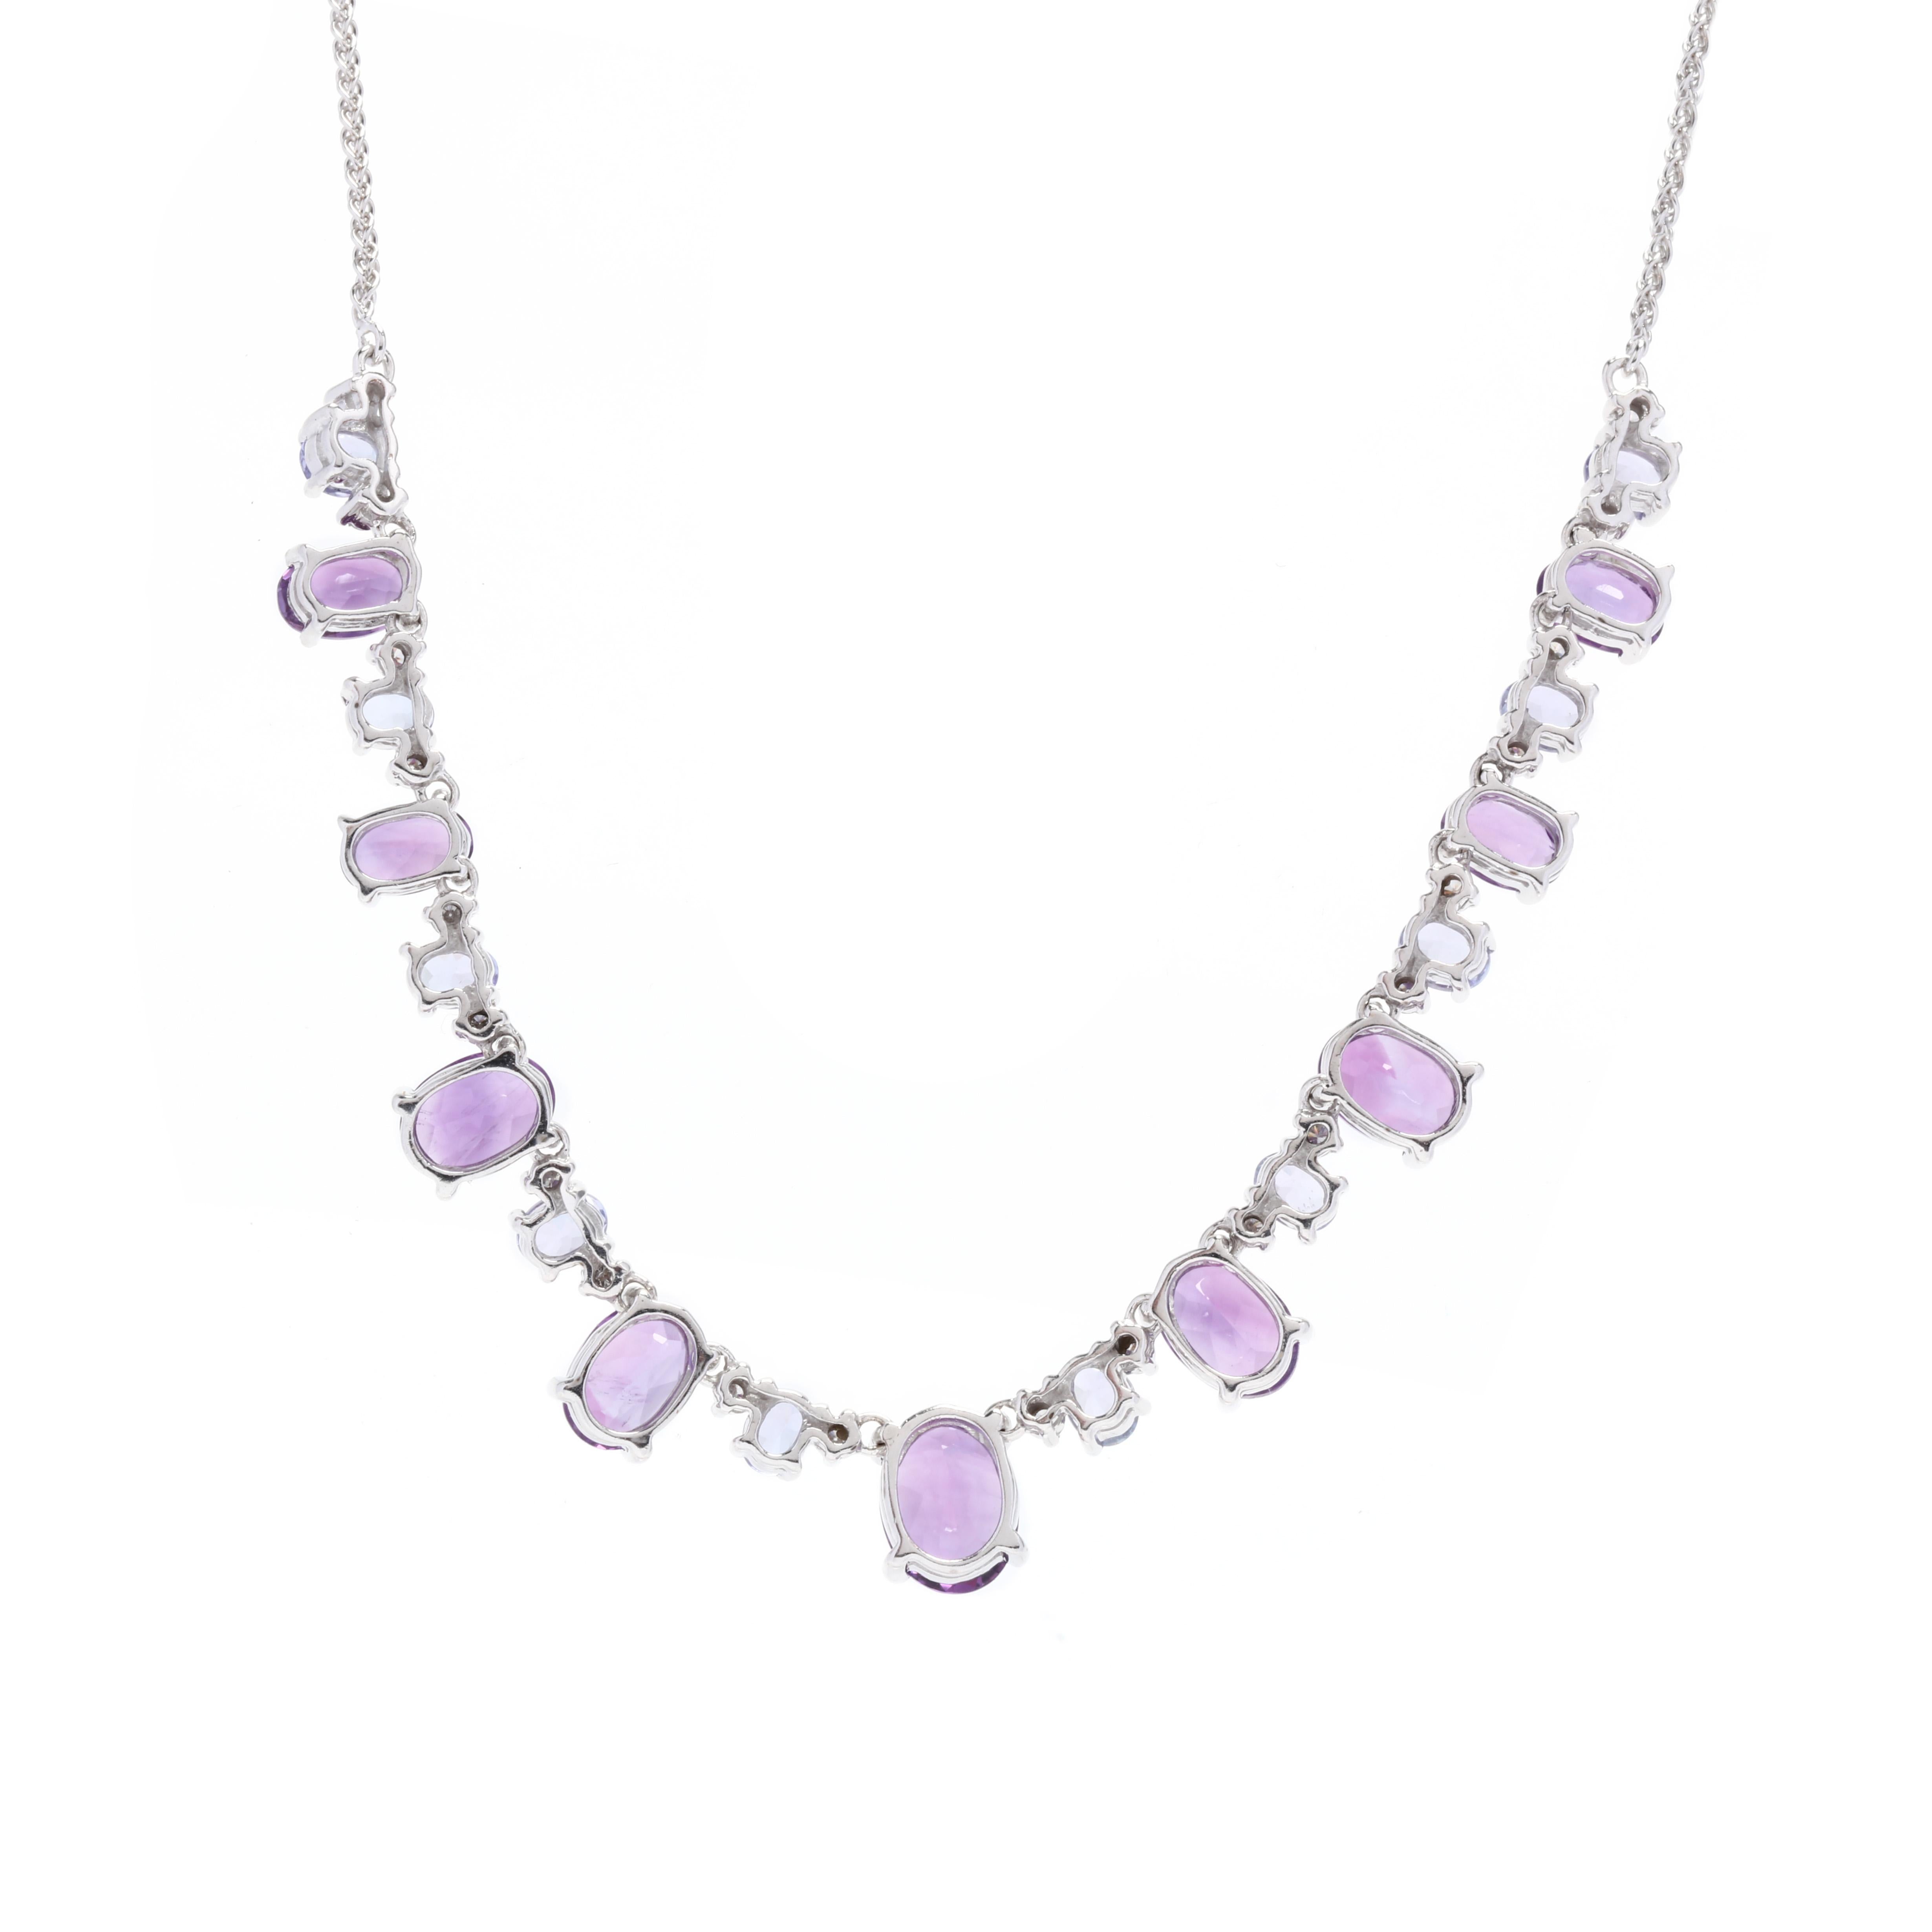 A 14 karat white gold amethyst, tanzanite and diamond collar necklace. This necklace features alternating oval cut amethysts weighing approximately 5.84 carats, oval cut tanzanites weighing approximately 2 total carats, and full cut round diamonds